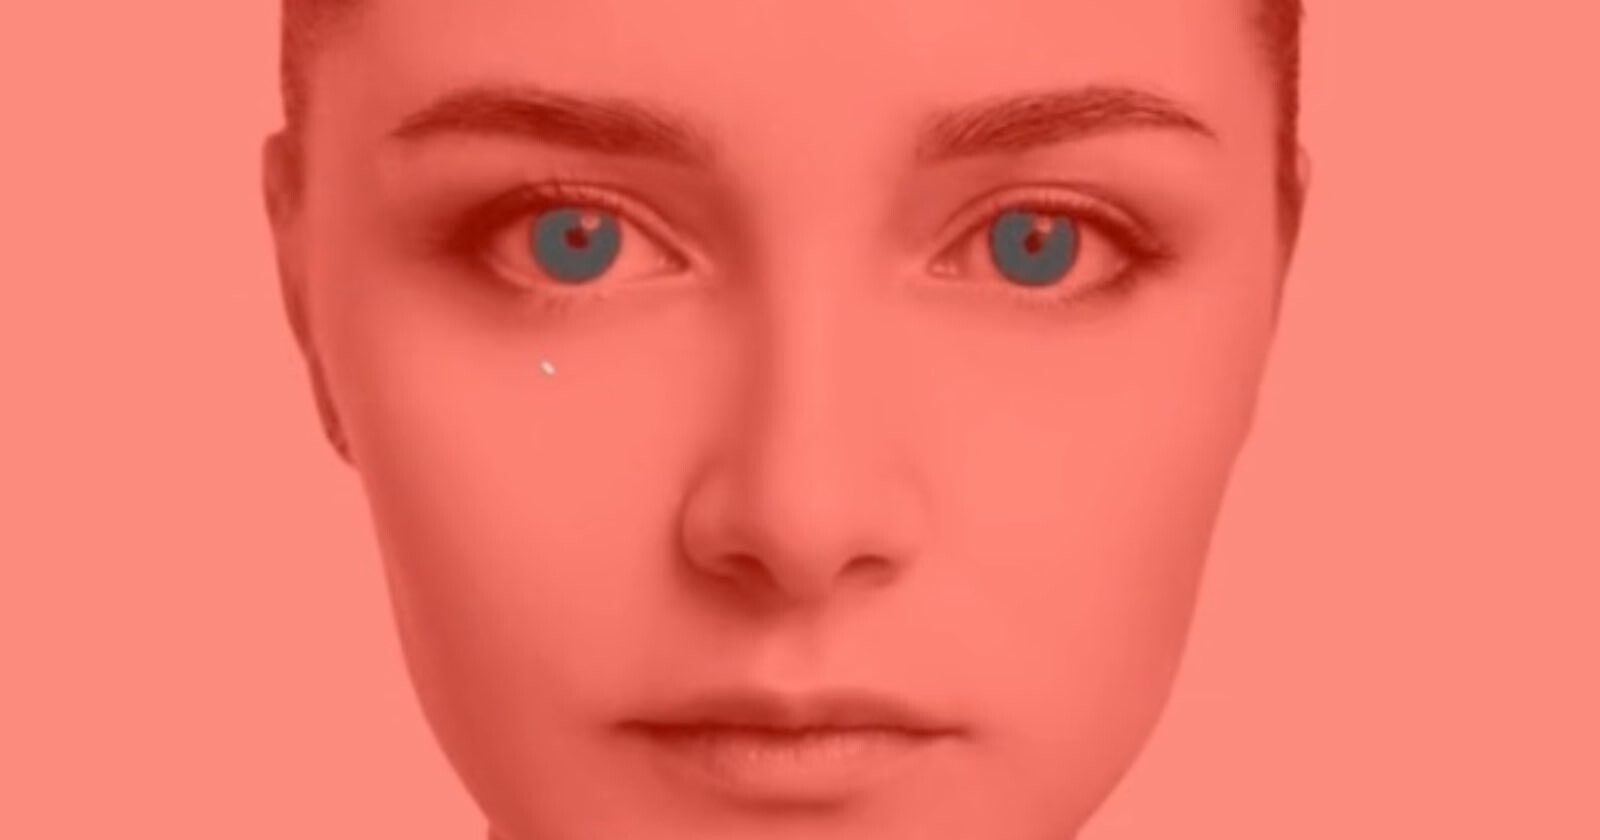  woman eyes photo are not blue 